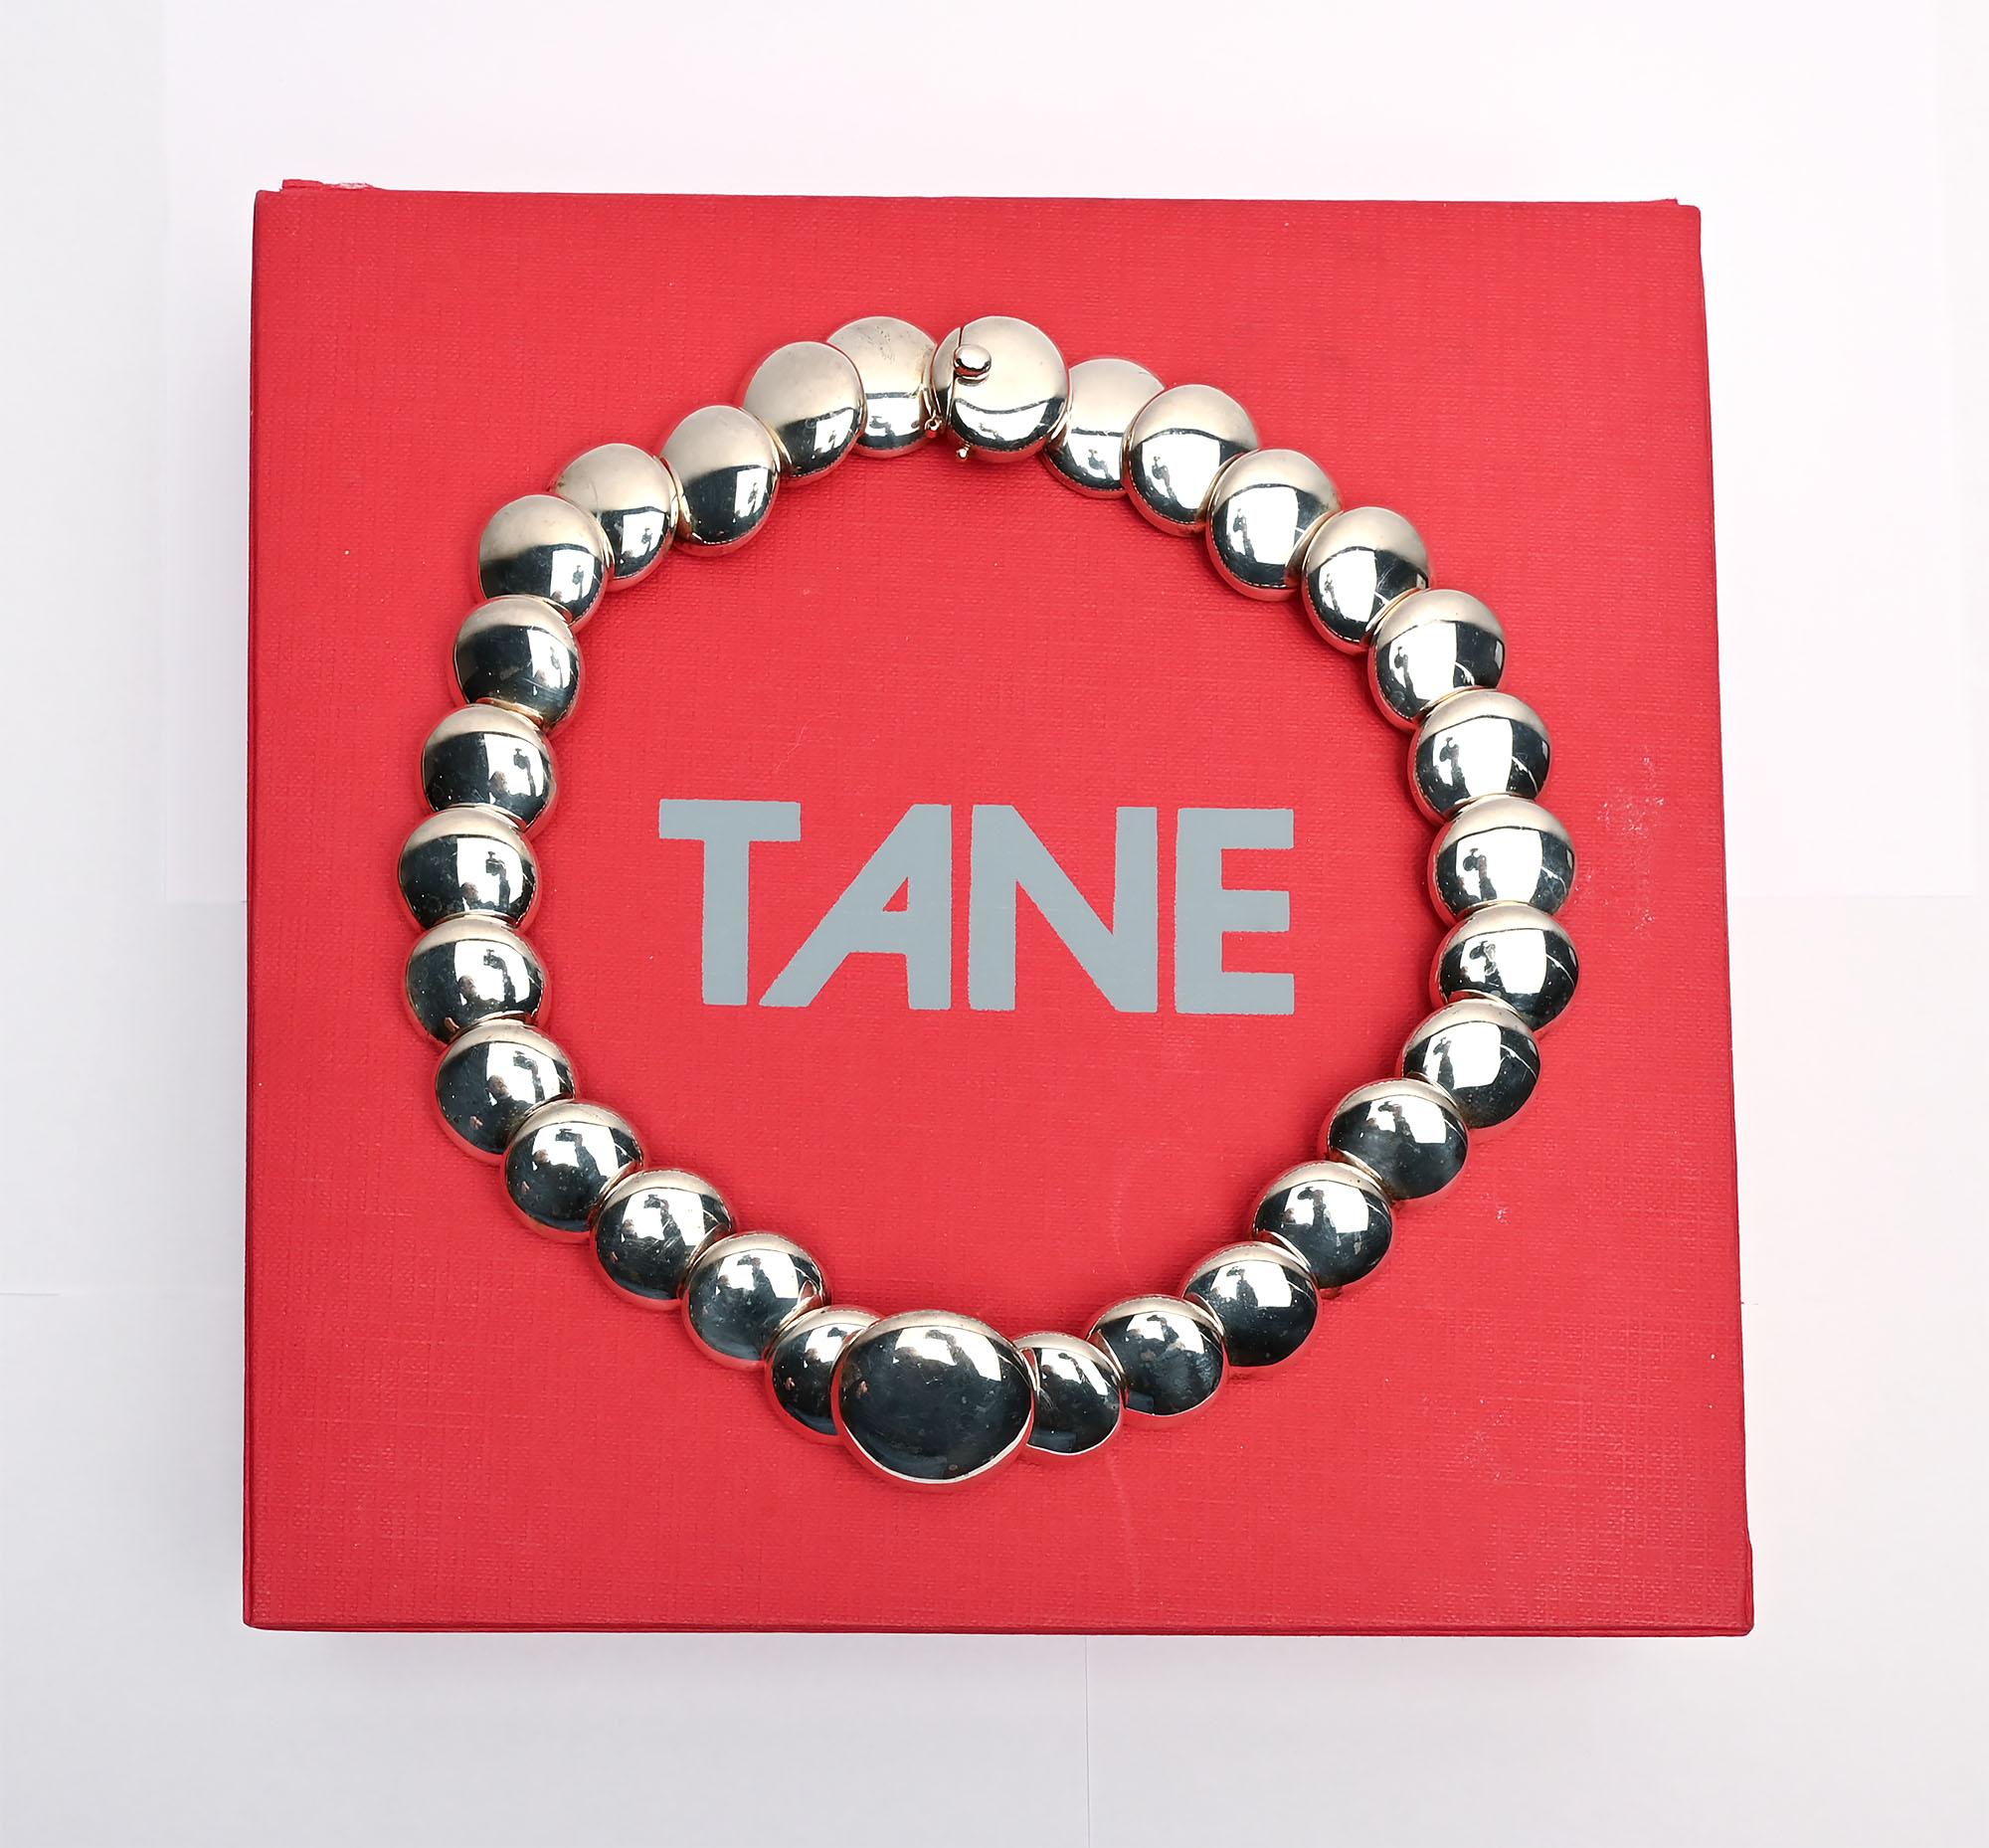 Stunning sterling silver necklace by Tane, Mexico's most prestigious jeweler. The necklace consists of overlapping circles that measure 3/4 inch in diameter. The center circle is 1 1/8 inches. The necklace has substantial weight (245 grams) because